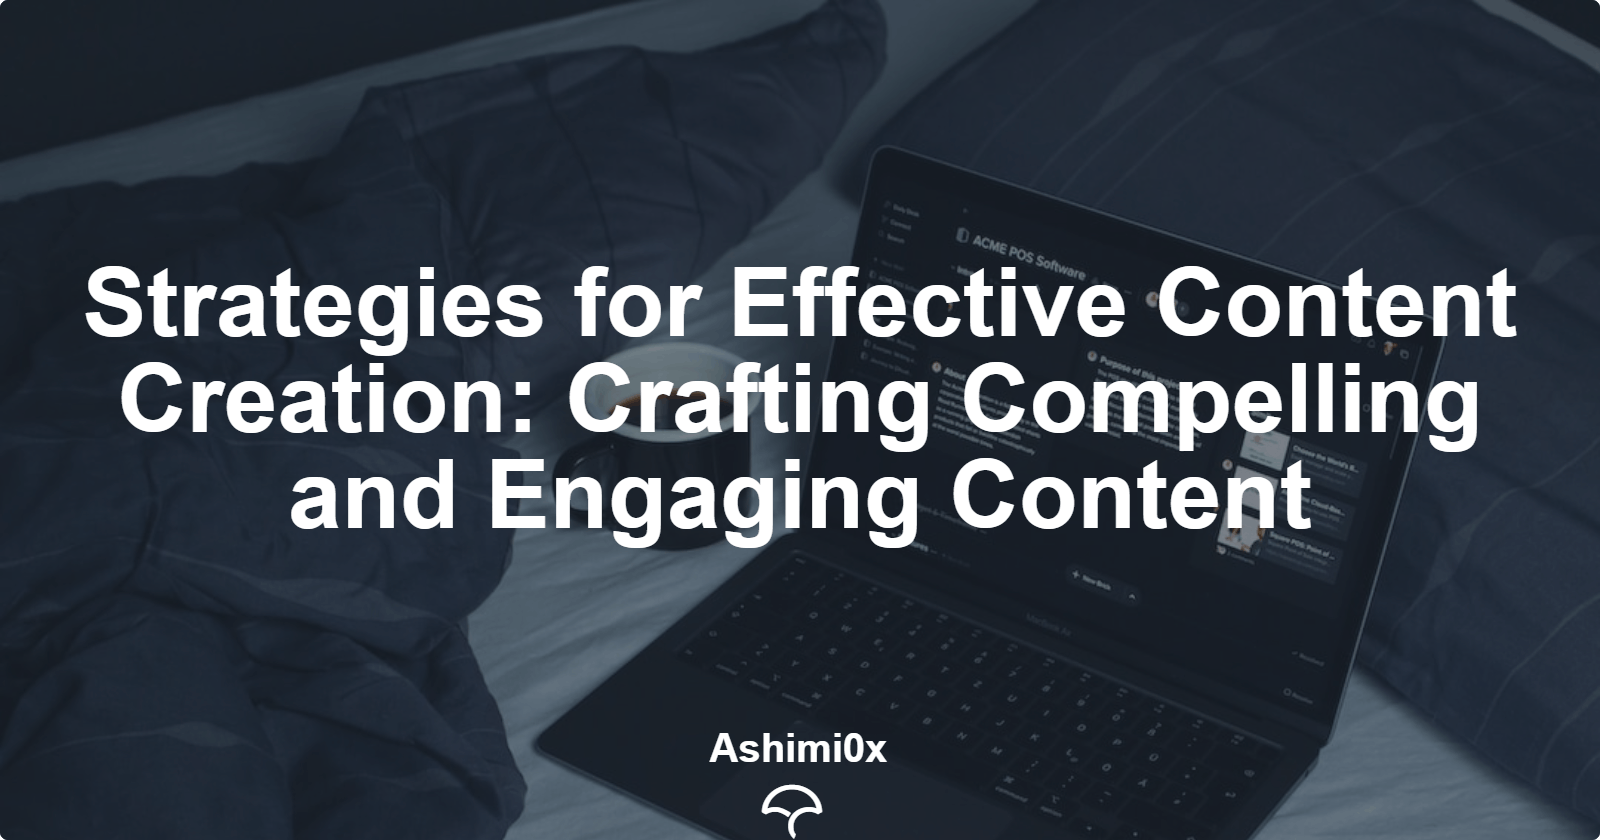 Strategies for Effective Content Creation: Crafting Compelling and Engaging Content